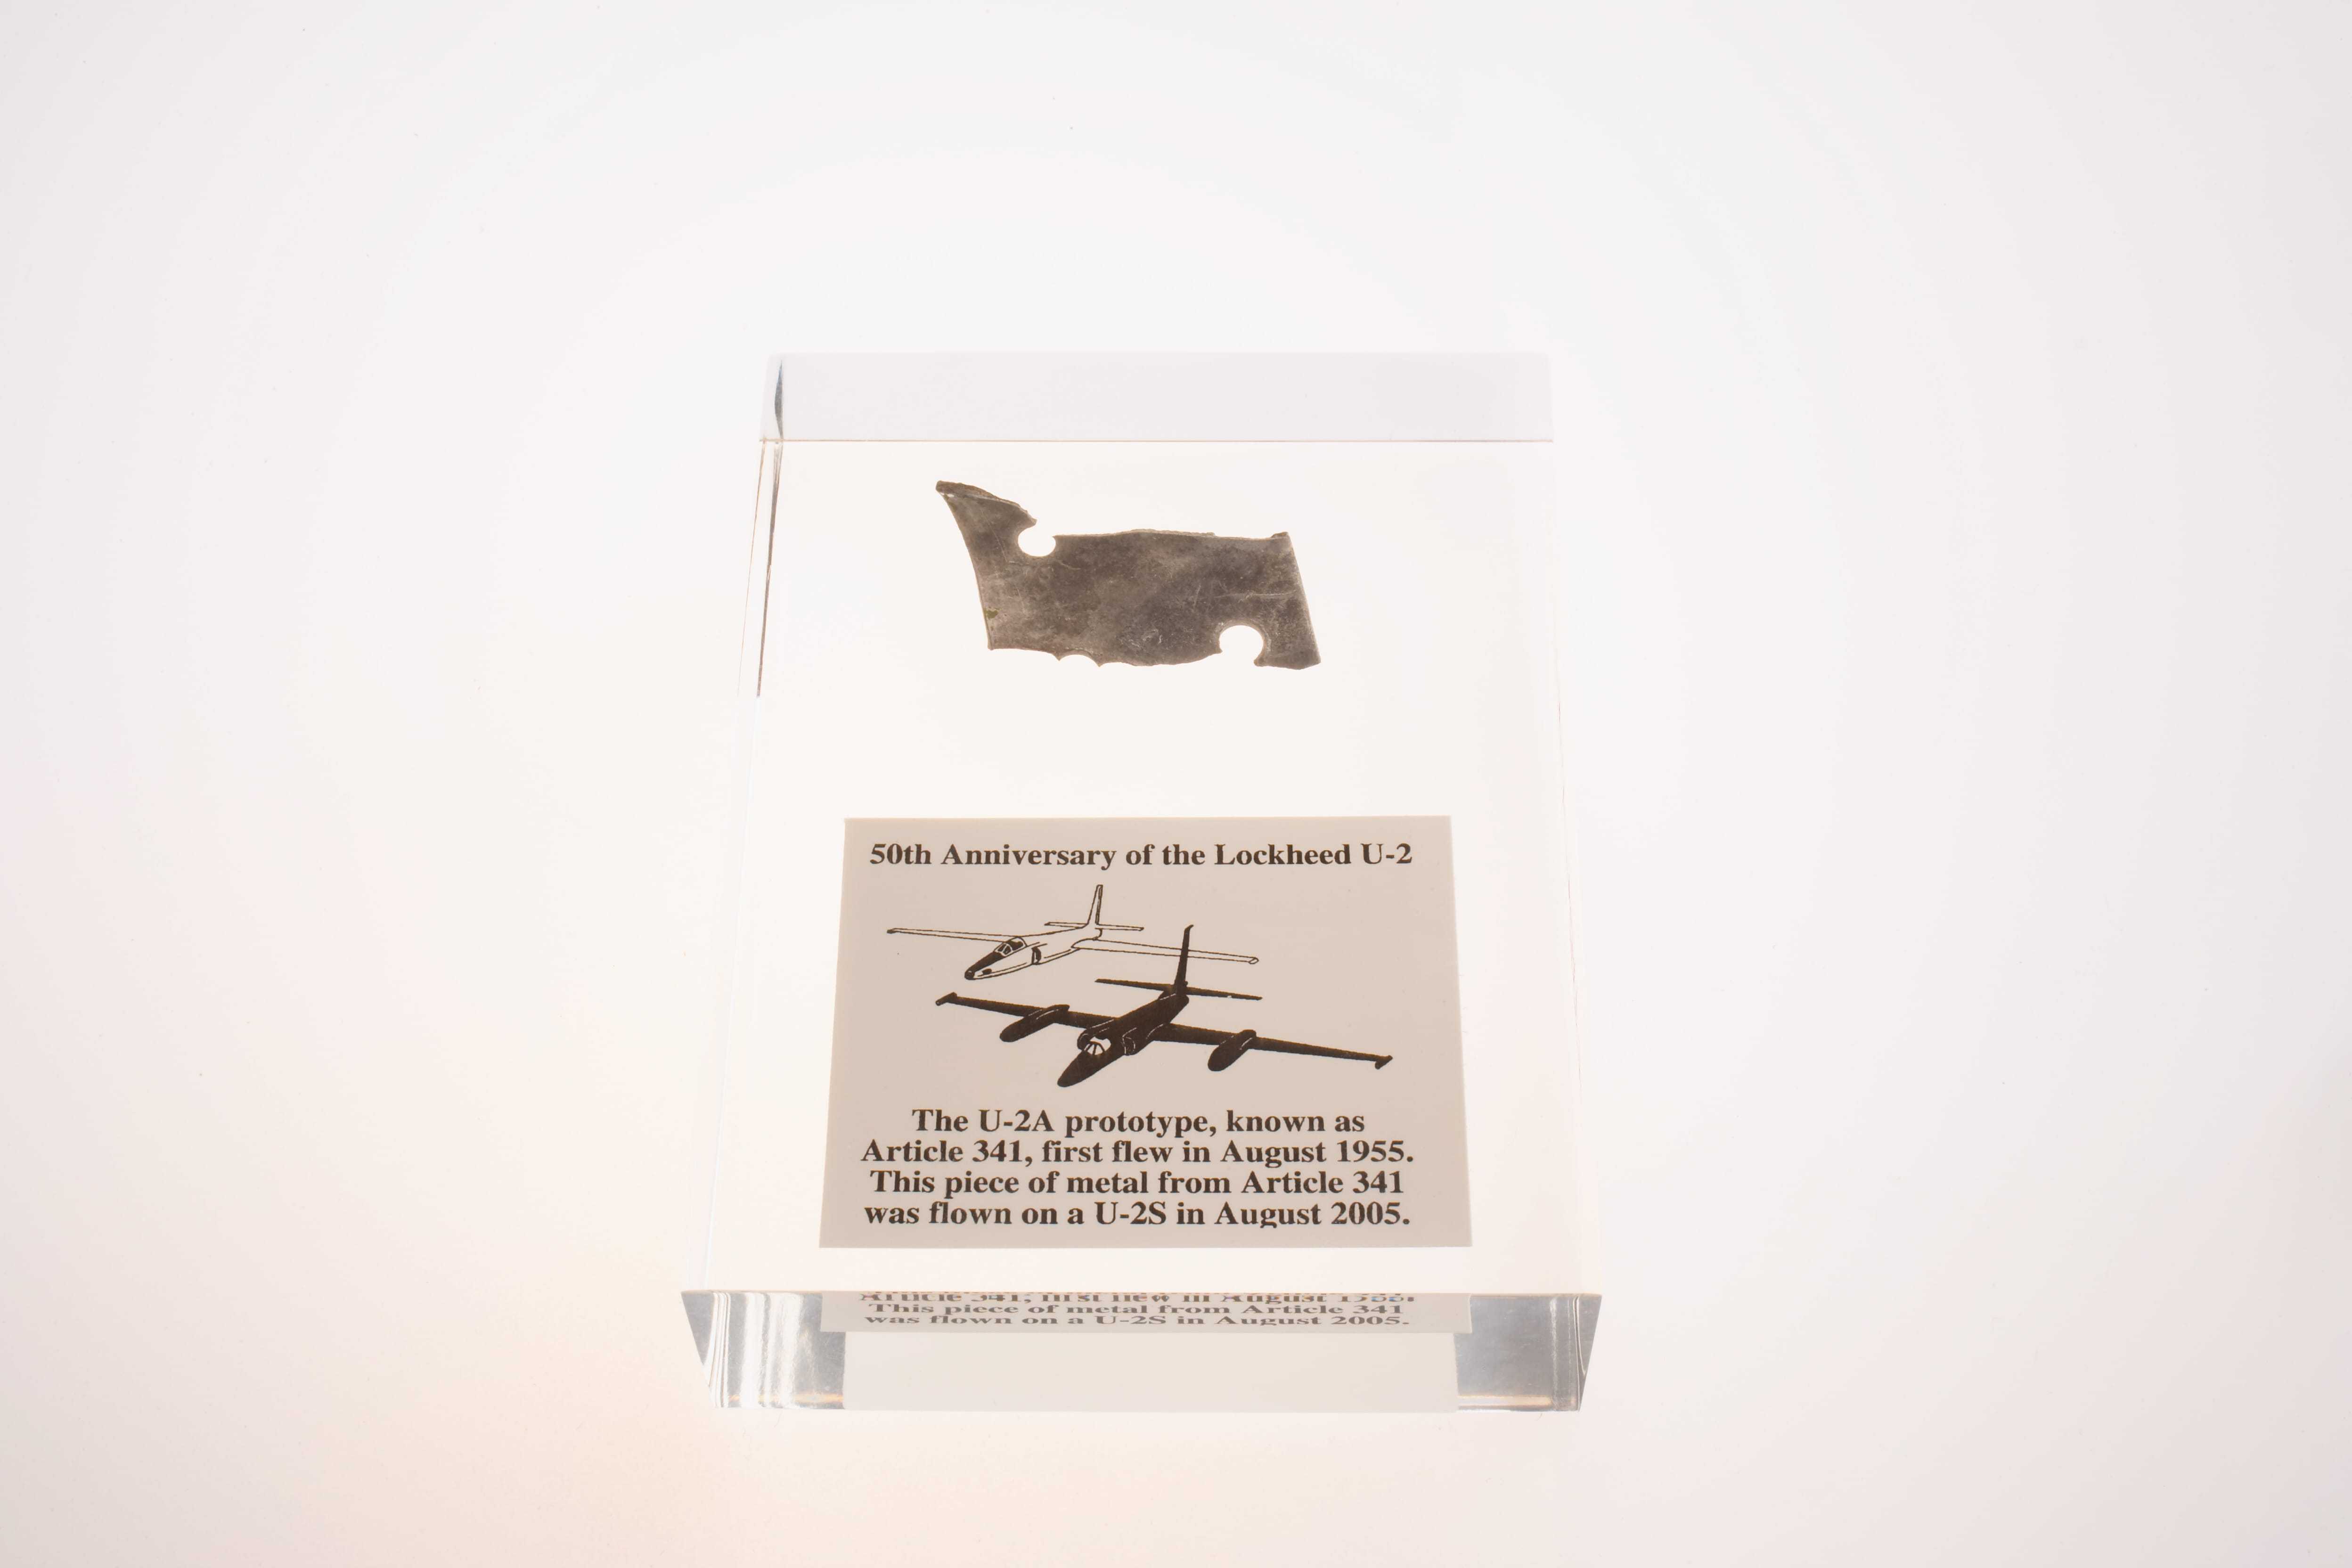 A metal shard from the U-2's first official flight encased in Lucite along with a plaque describing the event